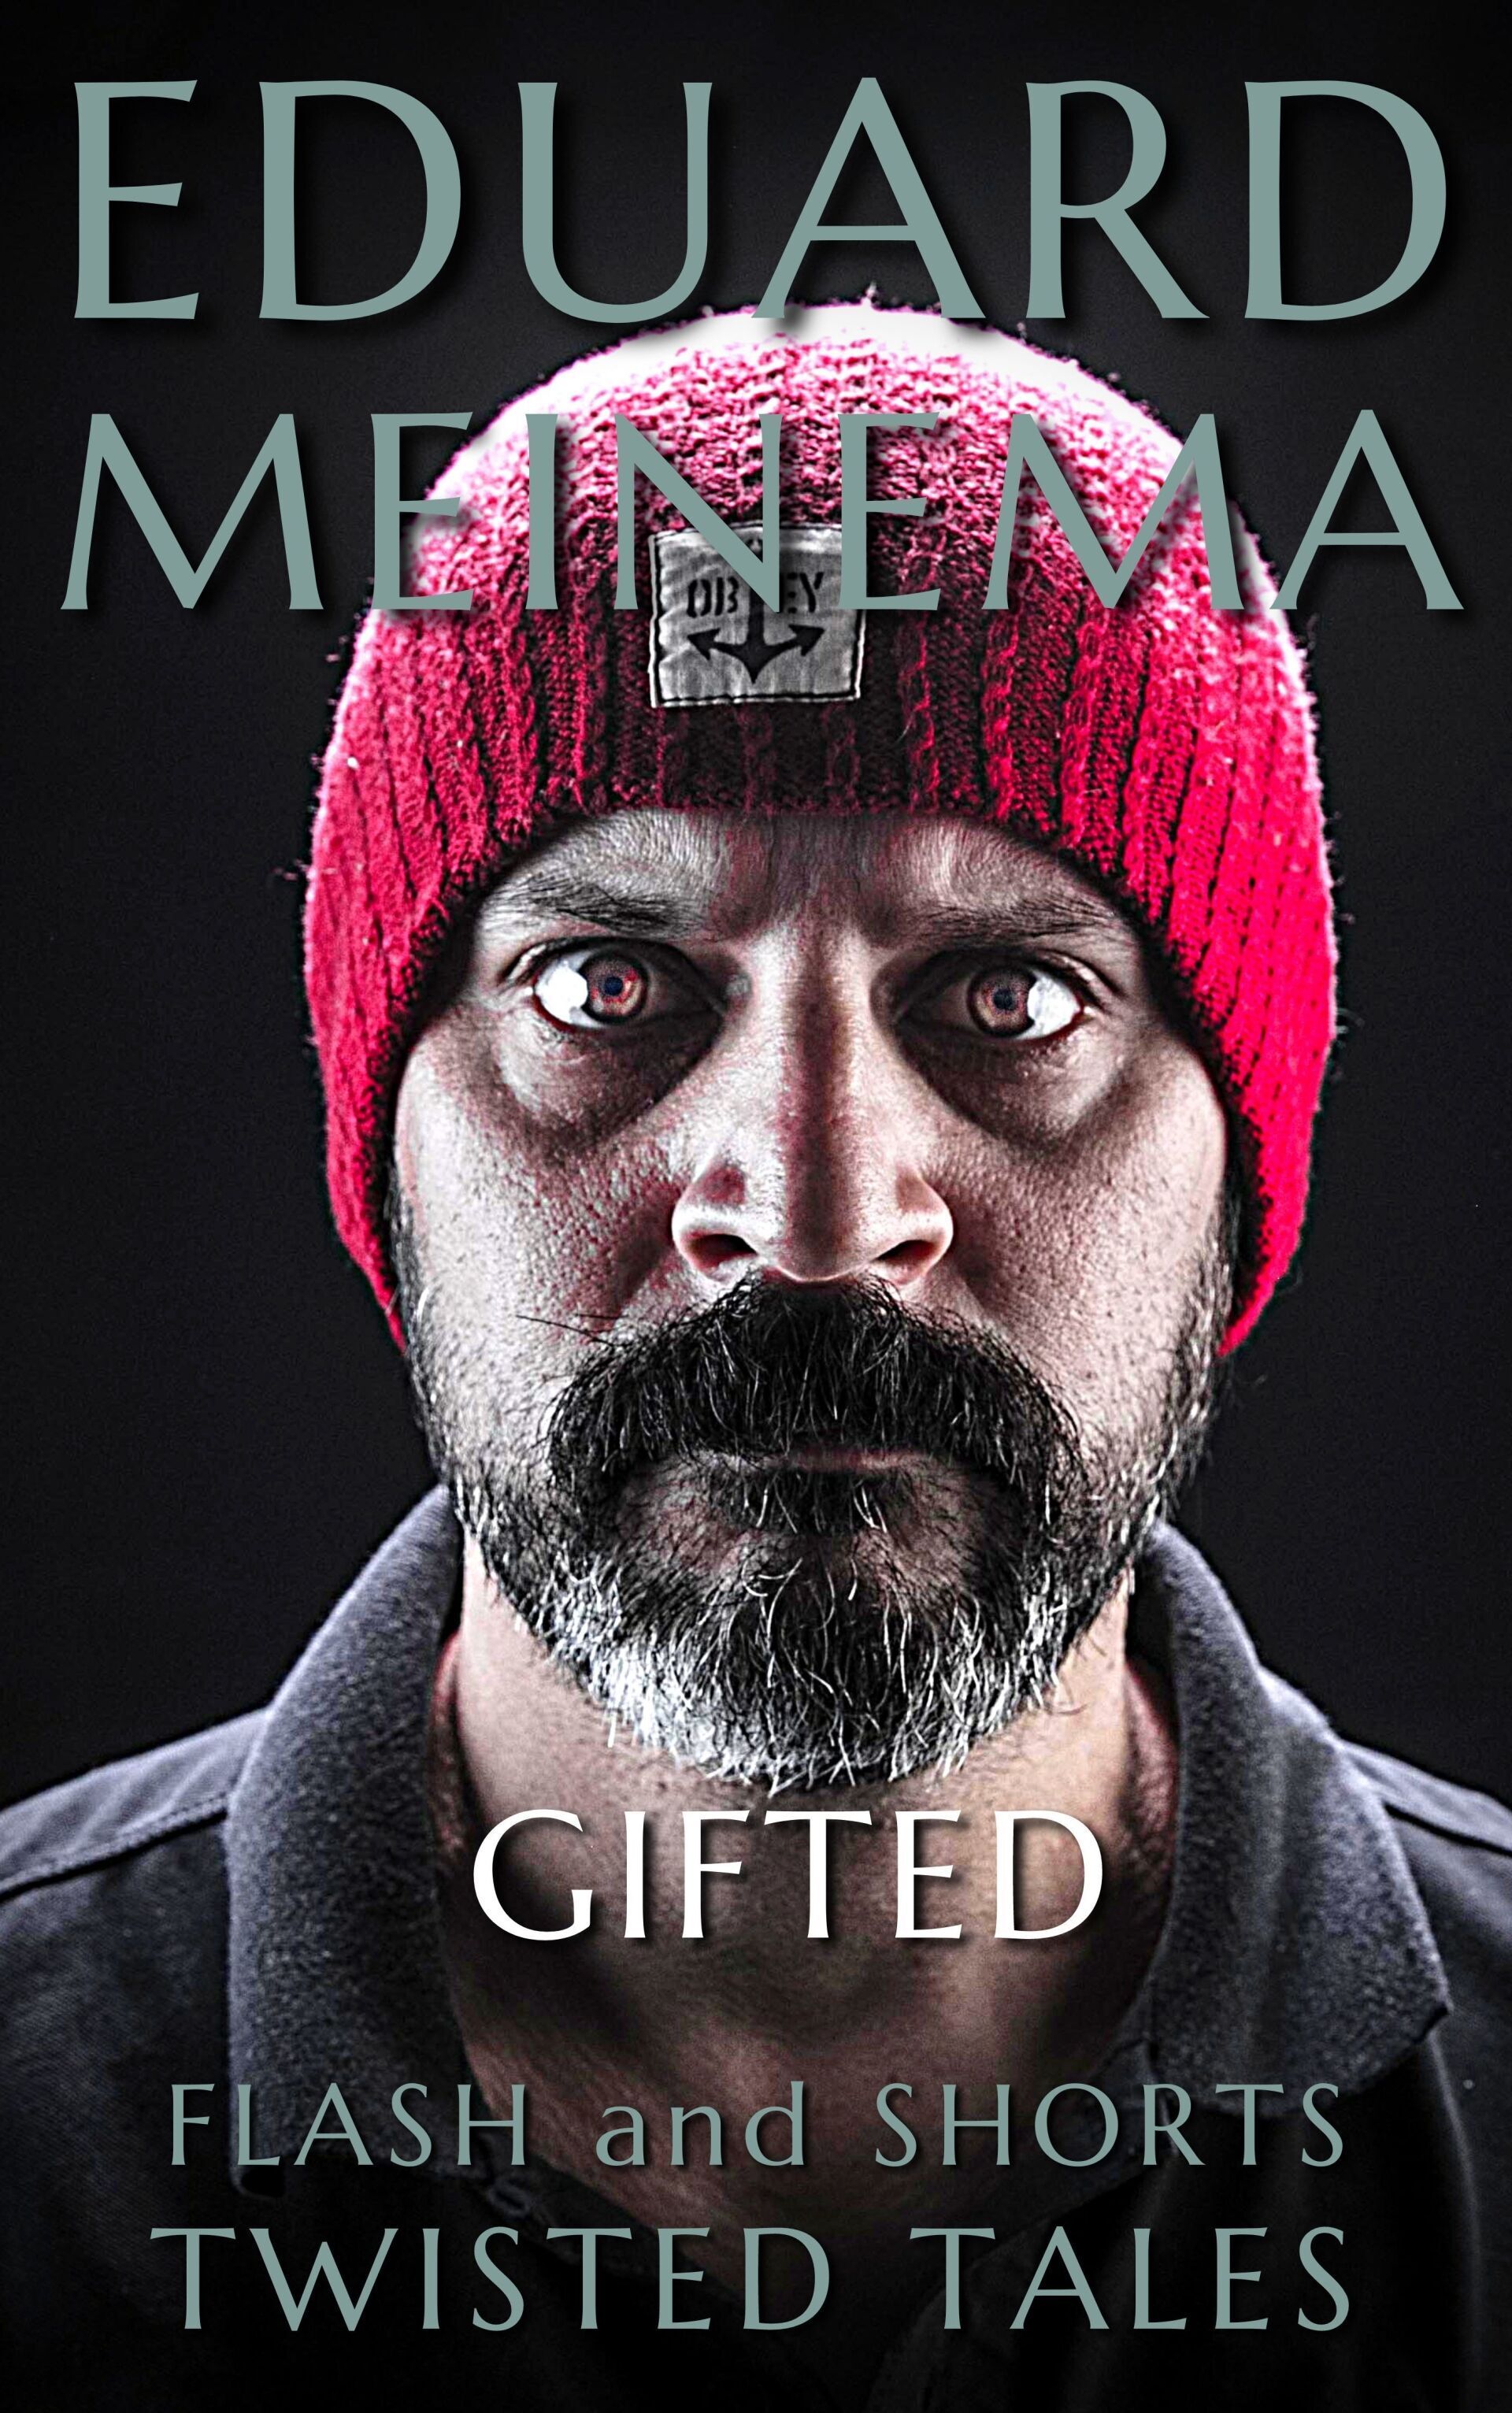 Gifted. A short story by Eduard Meinema